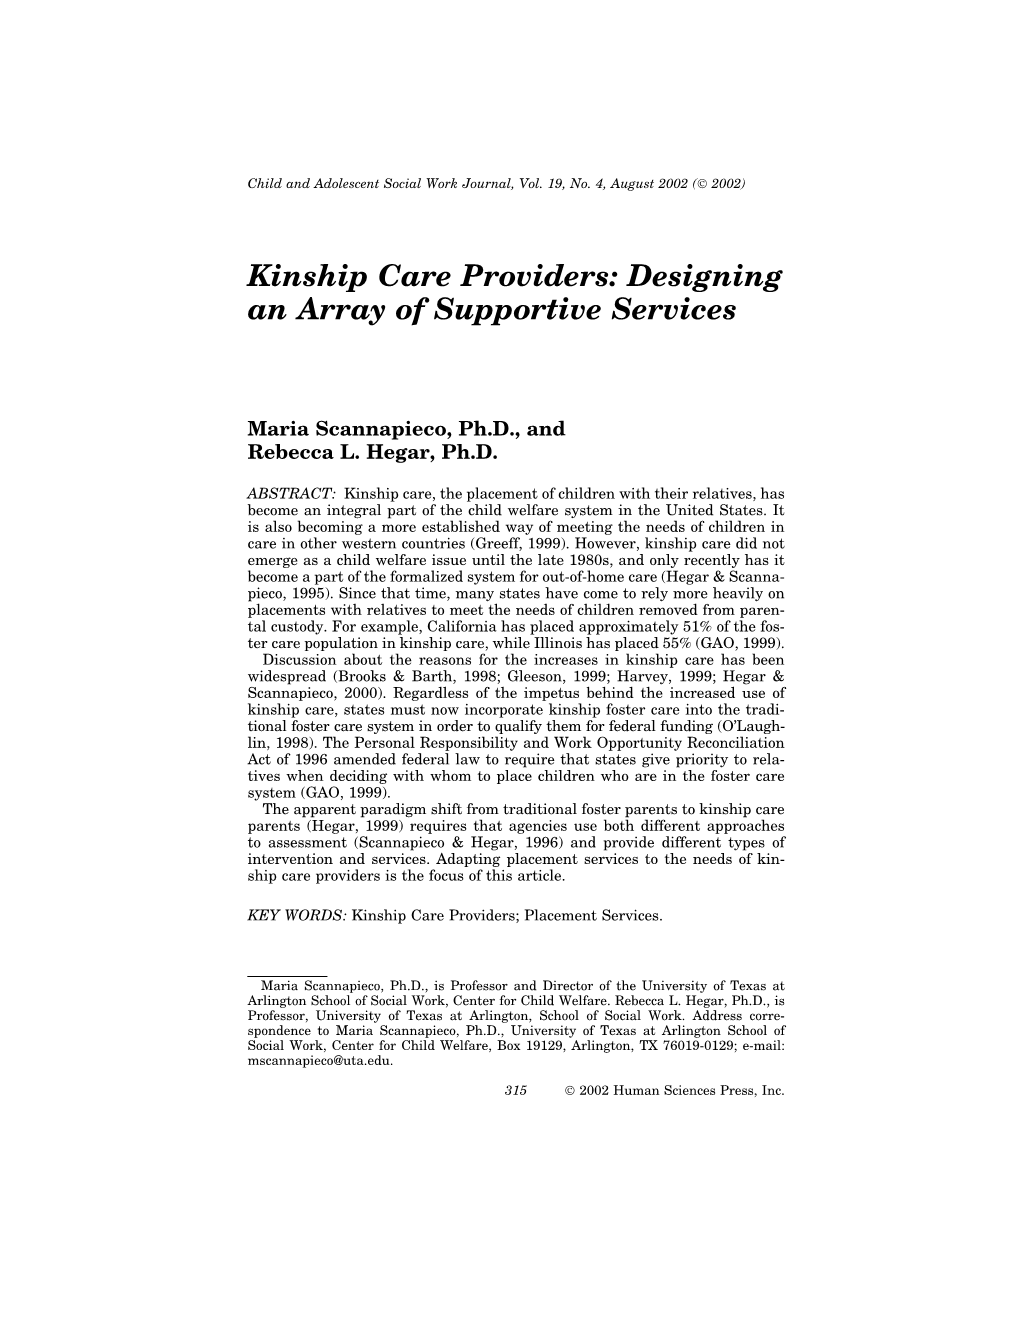 Kinship Care Providers: Designing an Array of Supportive Services